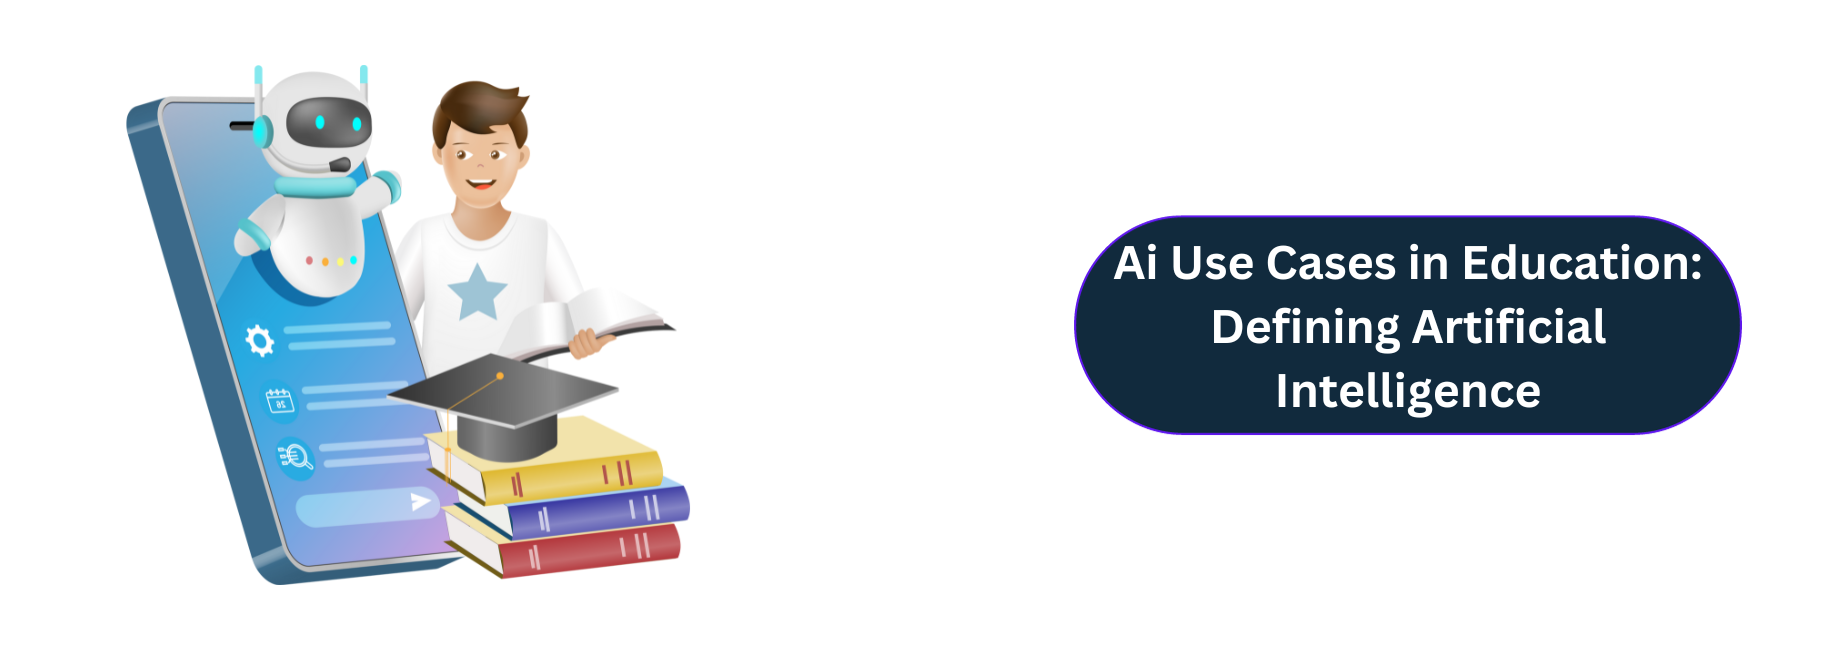 Ai Use Cases in Education : Defining Artificial Intelligence